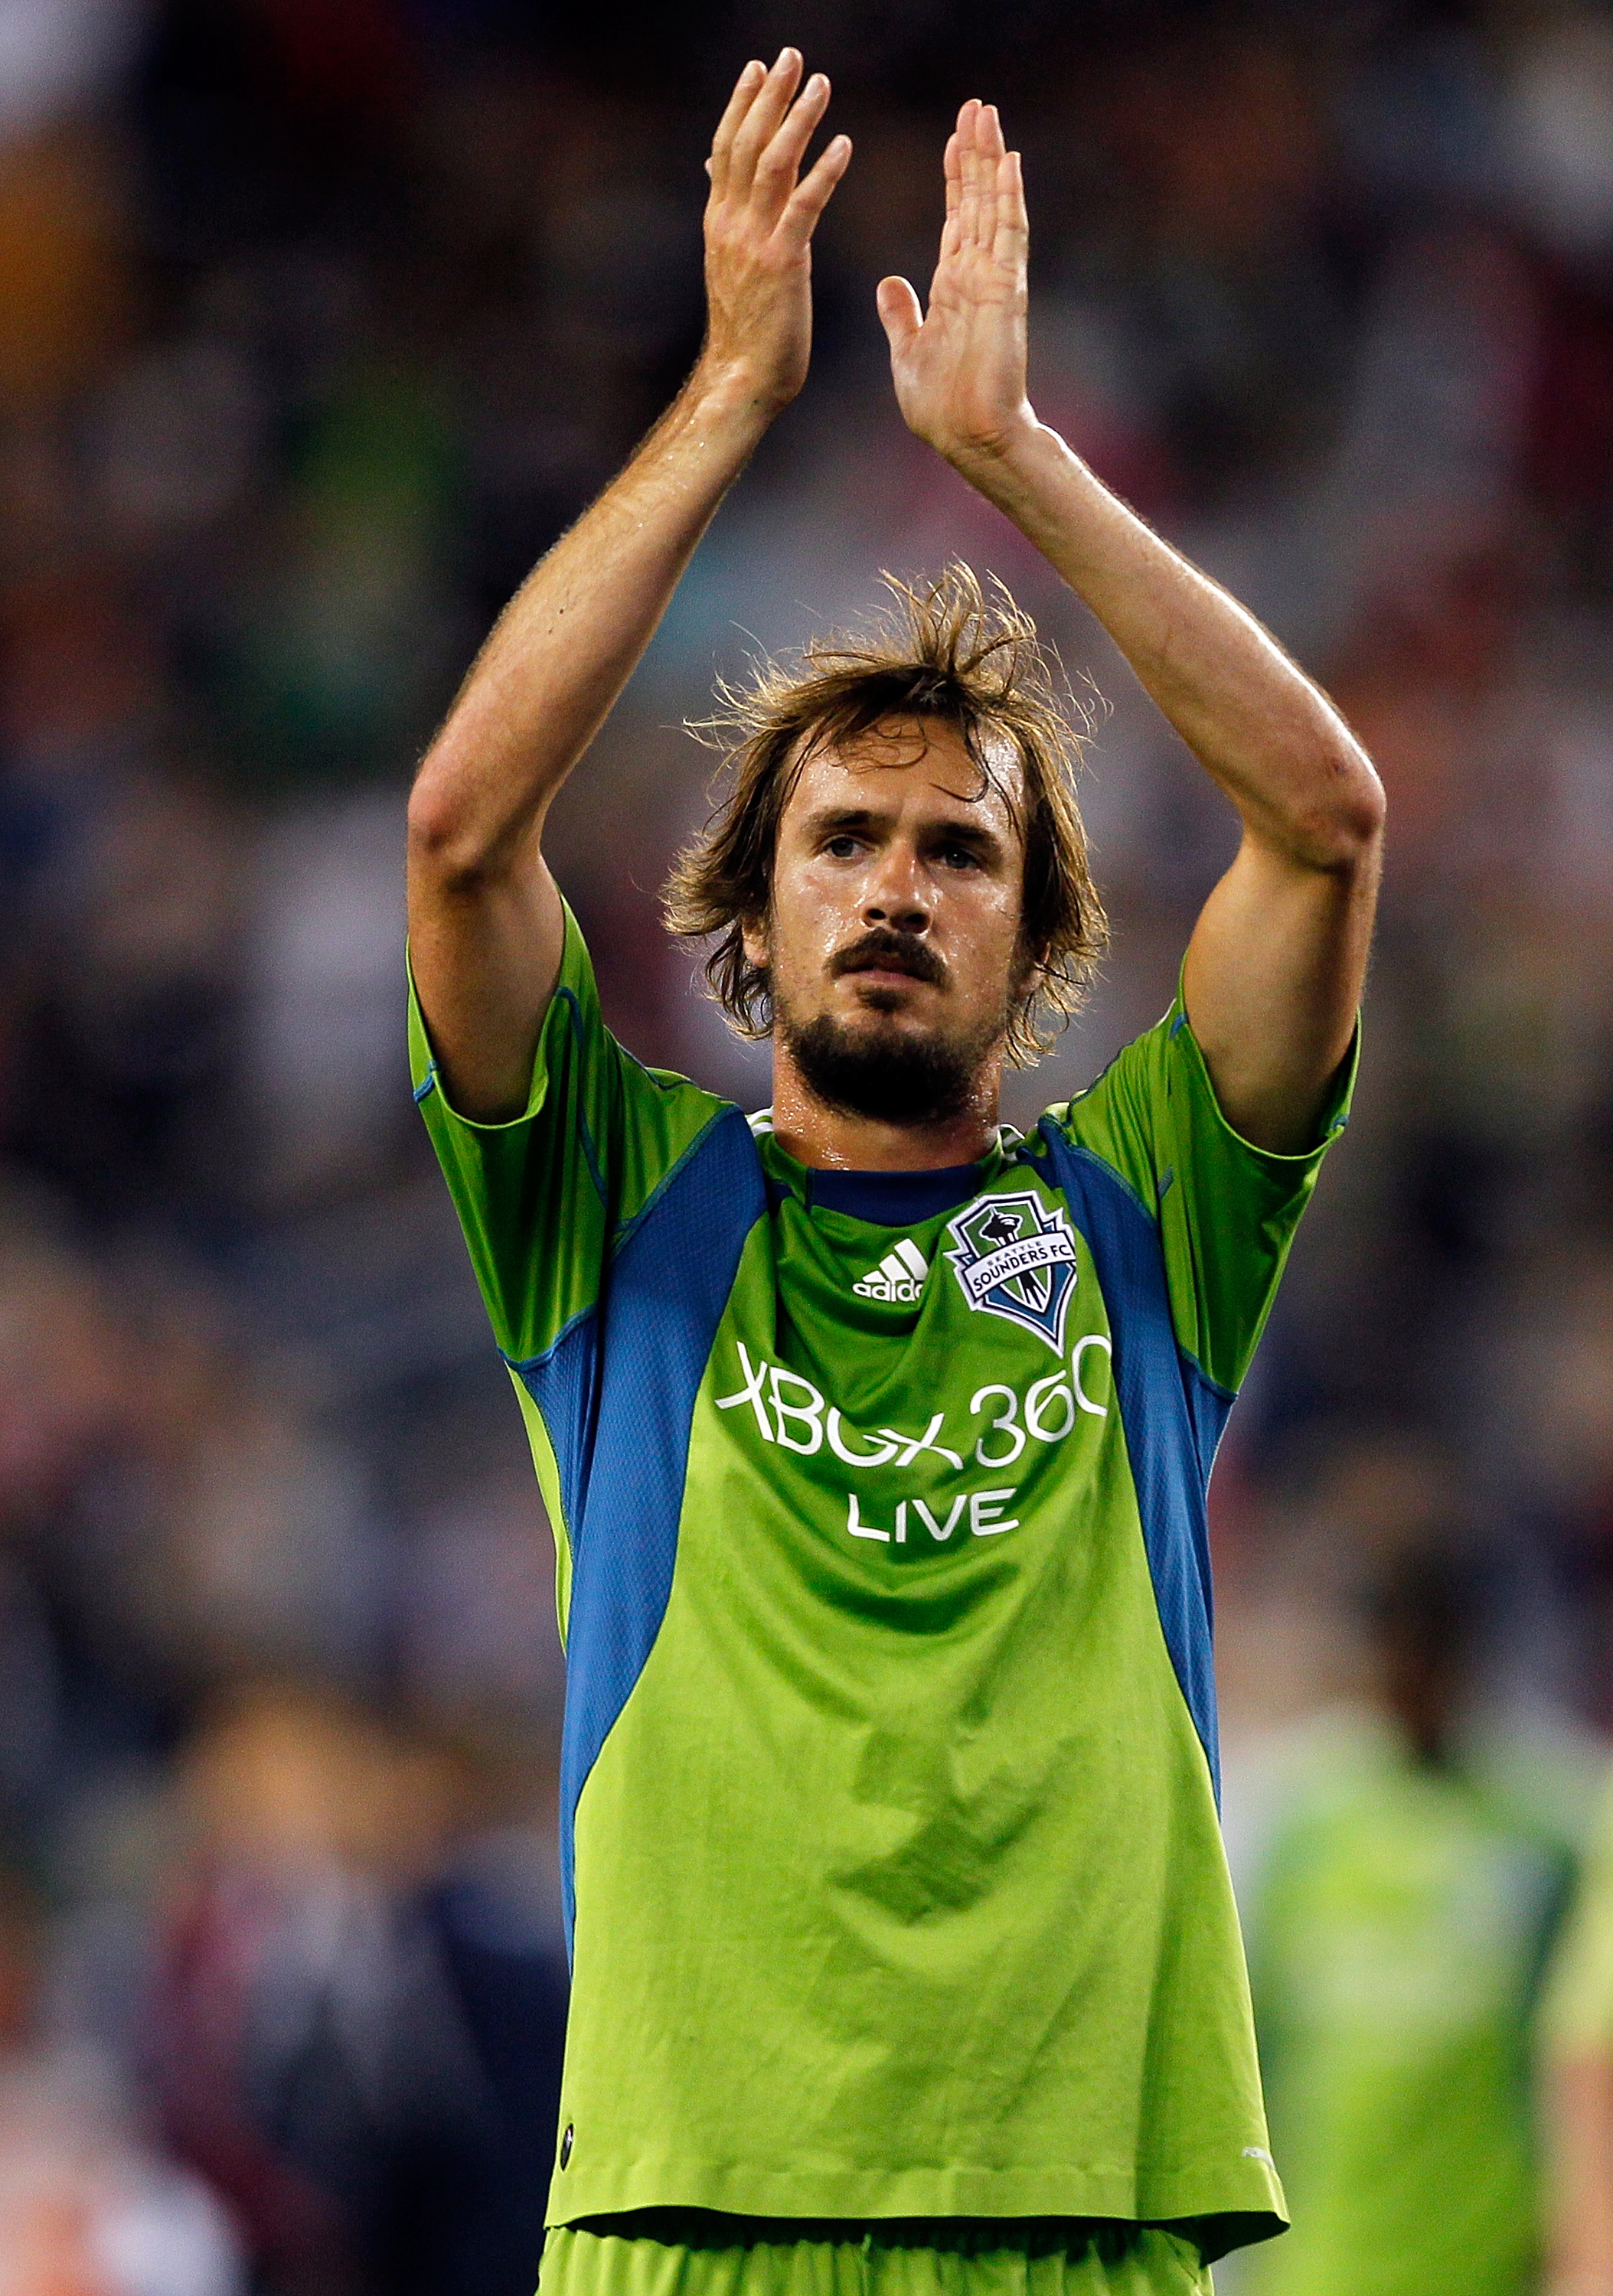 FOXBORO, MA - SEPTEMBER 4:  Roger Levesque #24 of the Seattle Sounders FC acknowledges the crowd at the end of a game against the New England Revolution at Gillette Stadium on September 4, 2010 in Foxboro, Massachusetts. (Photo by Gail Oskin/Getty Images)